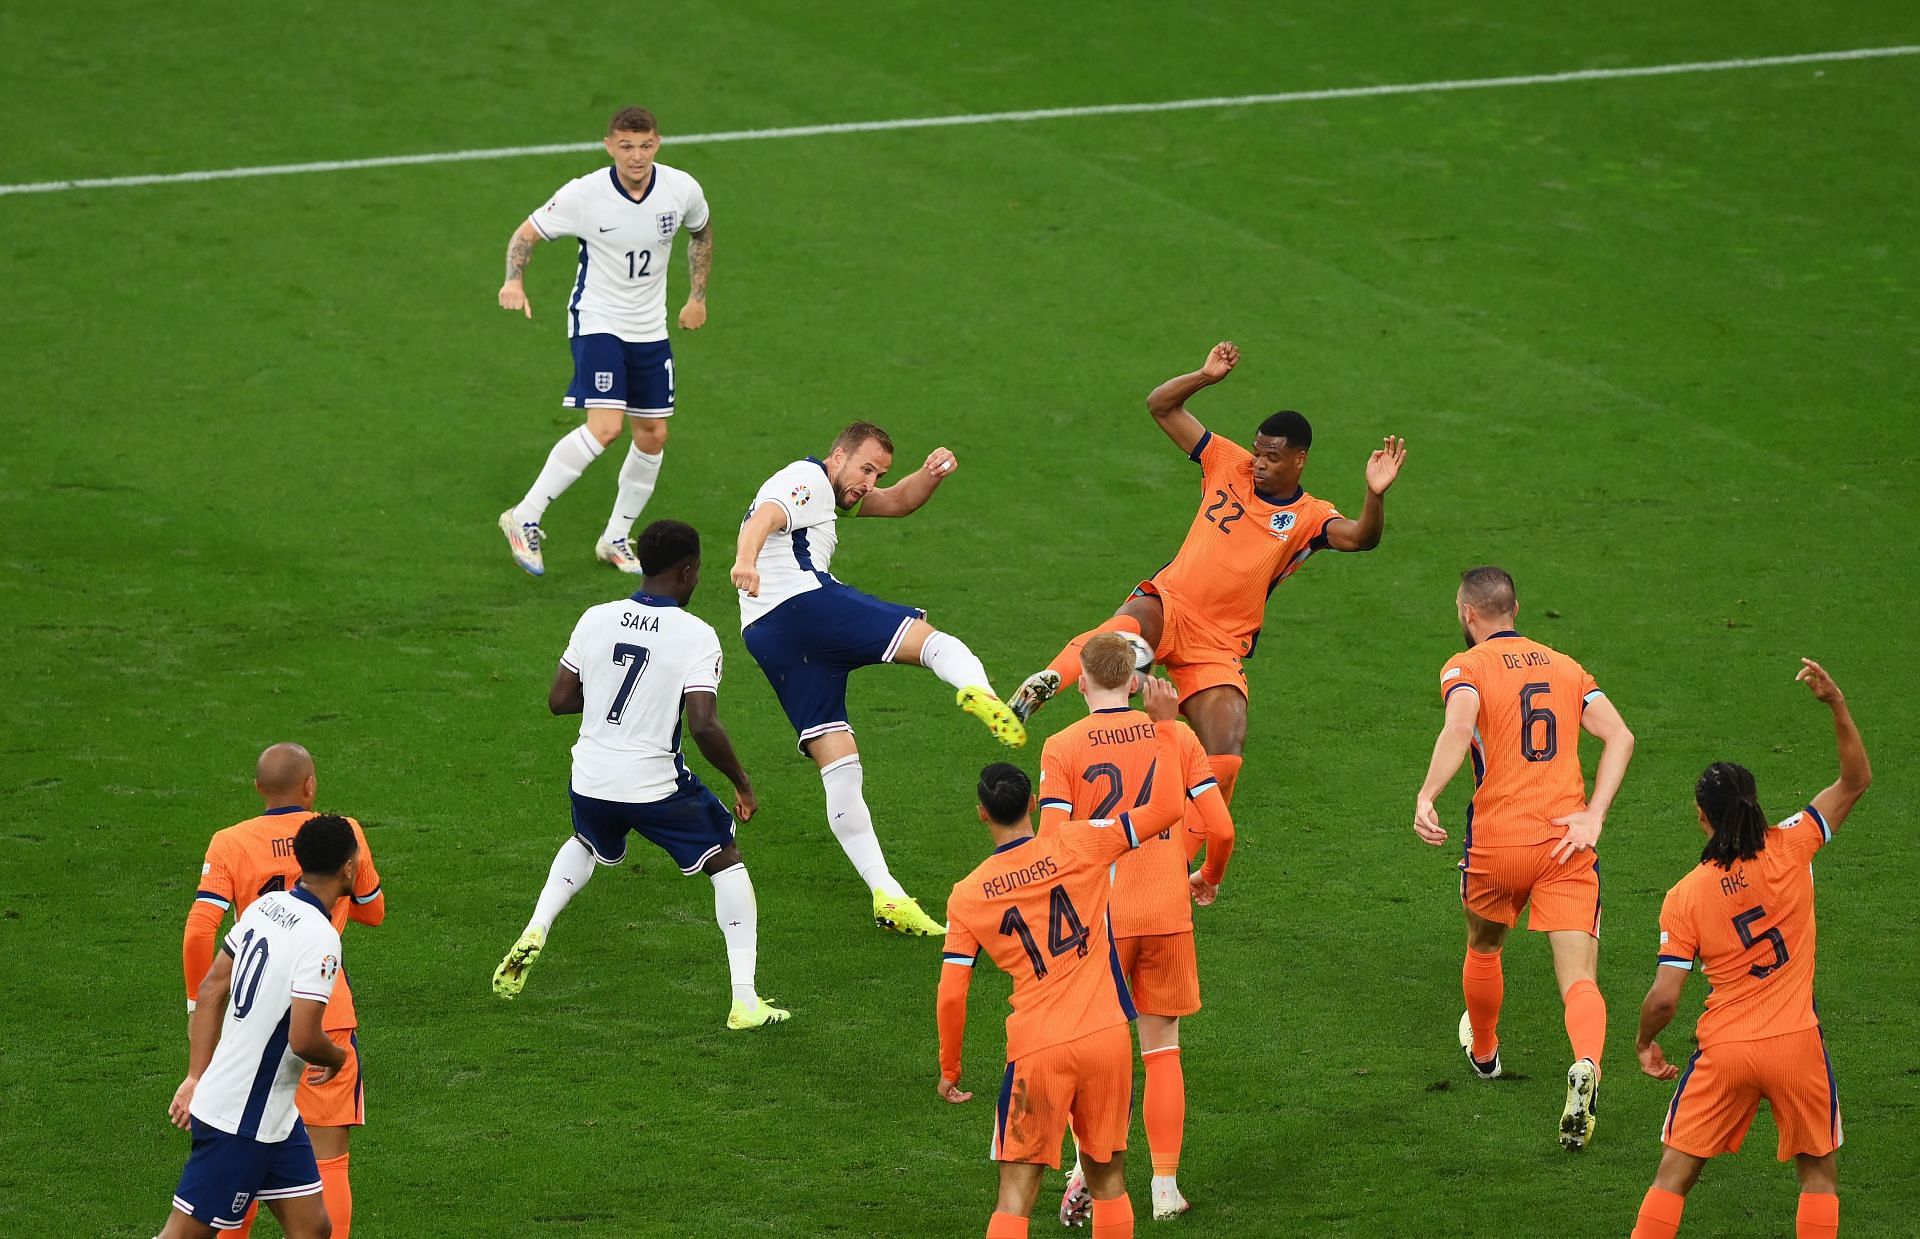 Gary Neville and Ian Wright involved in heated debate over England's penalty in 2-1 Euro 2024 semifinal win against Netherlands